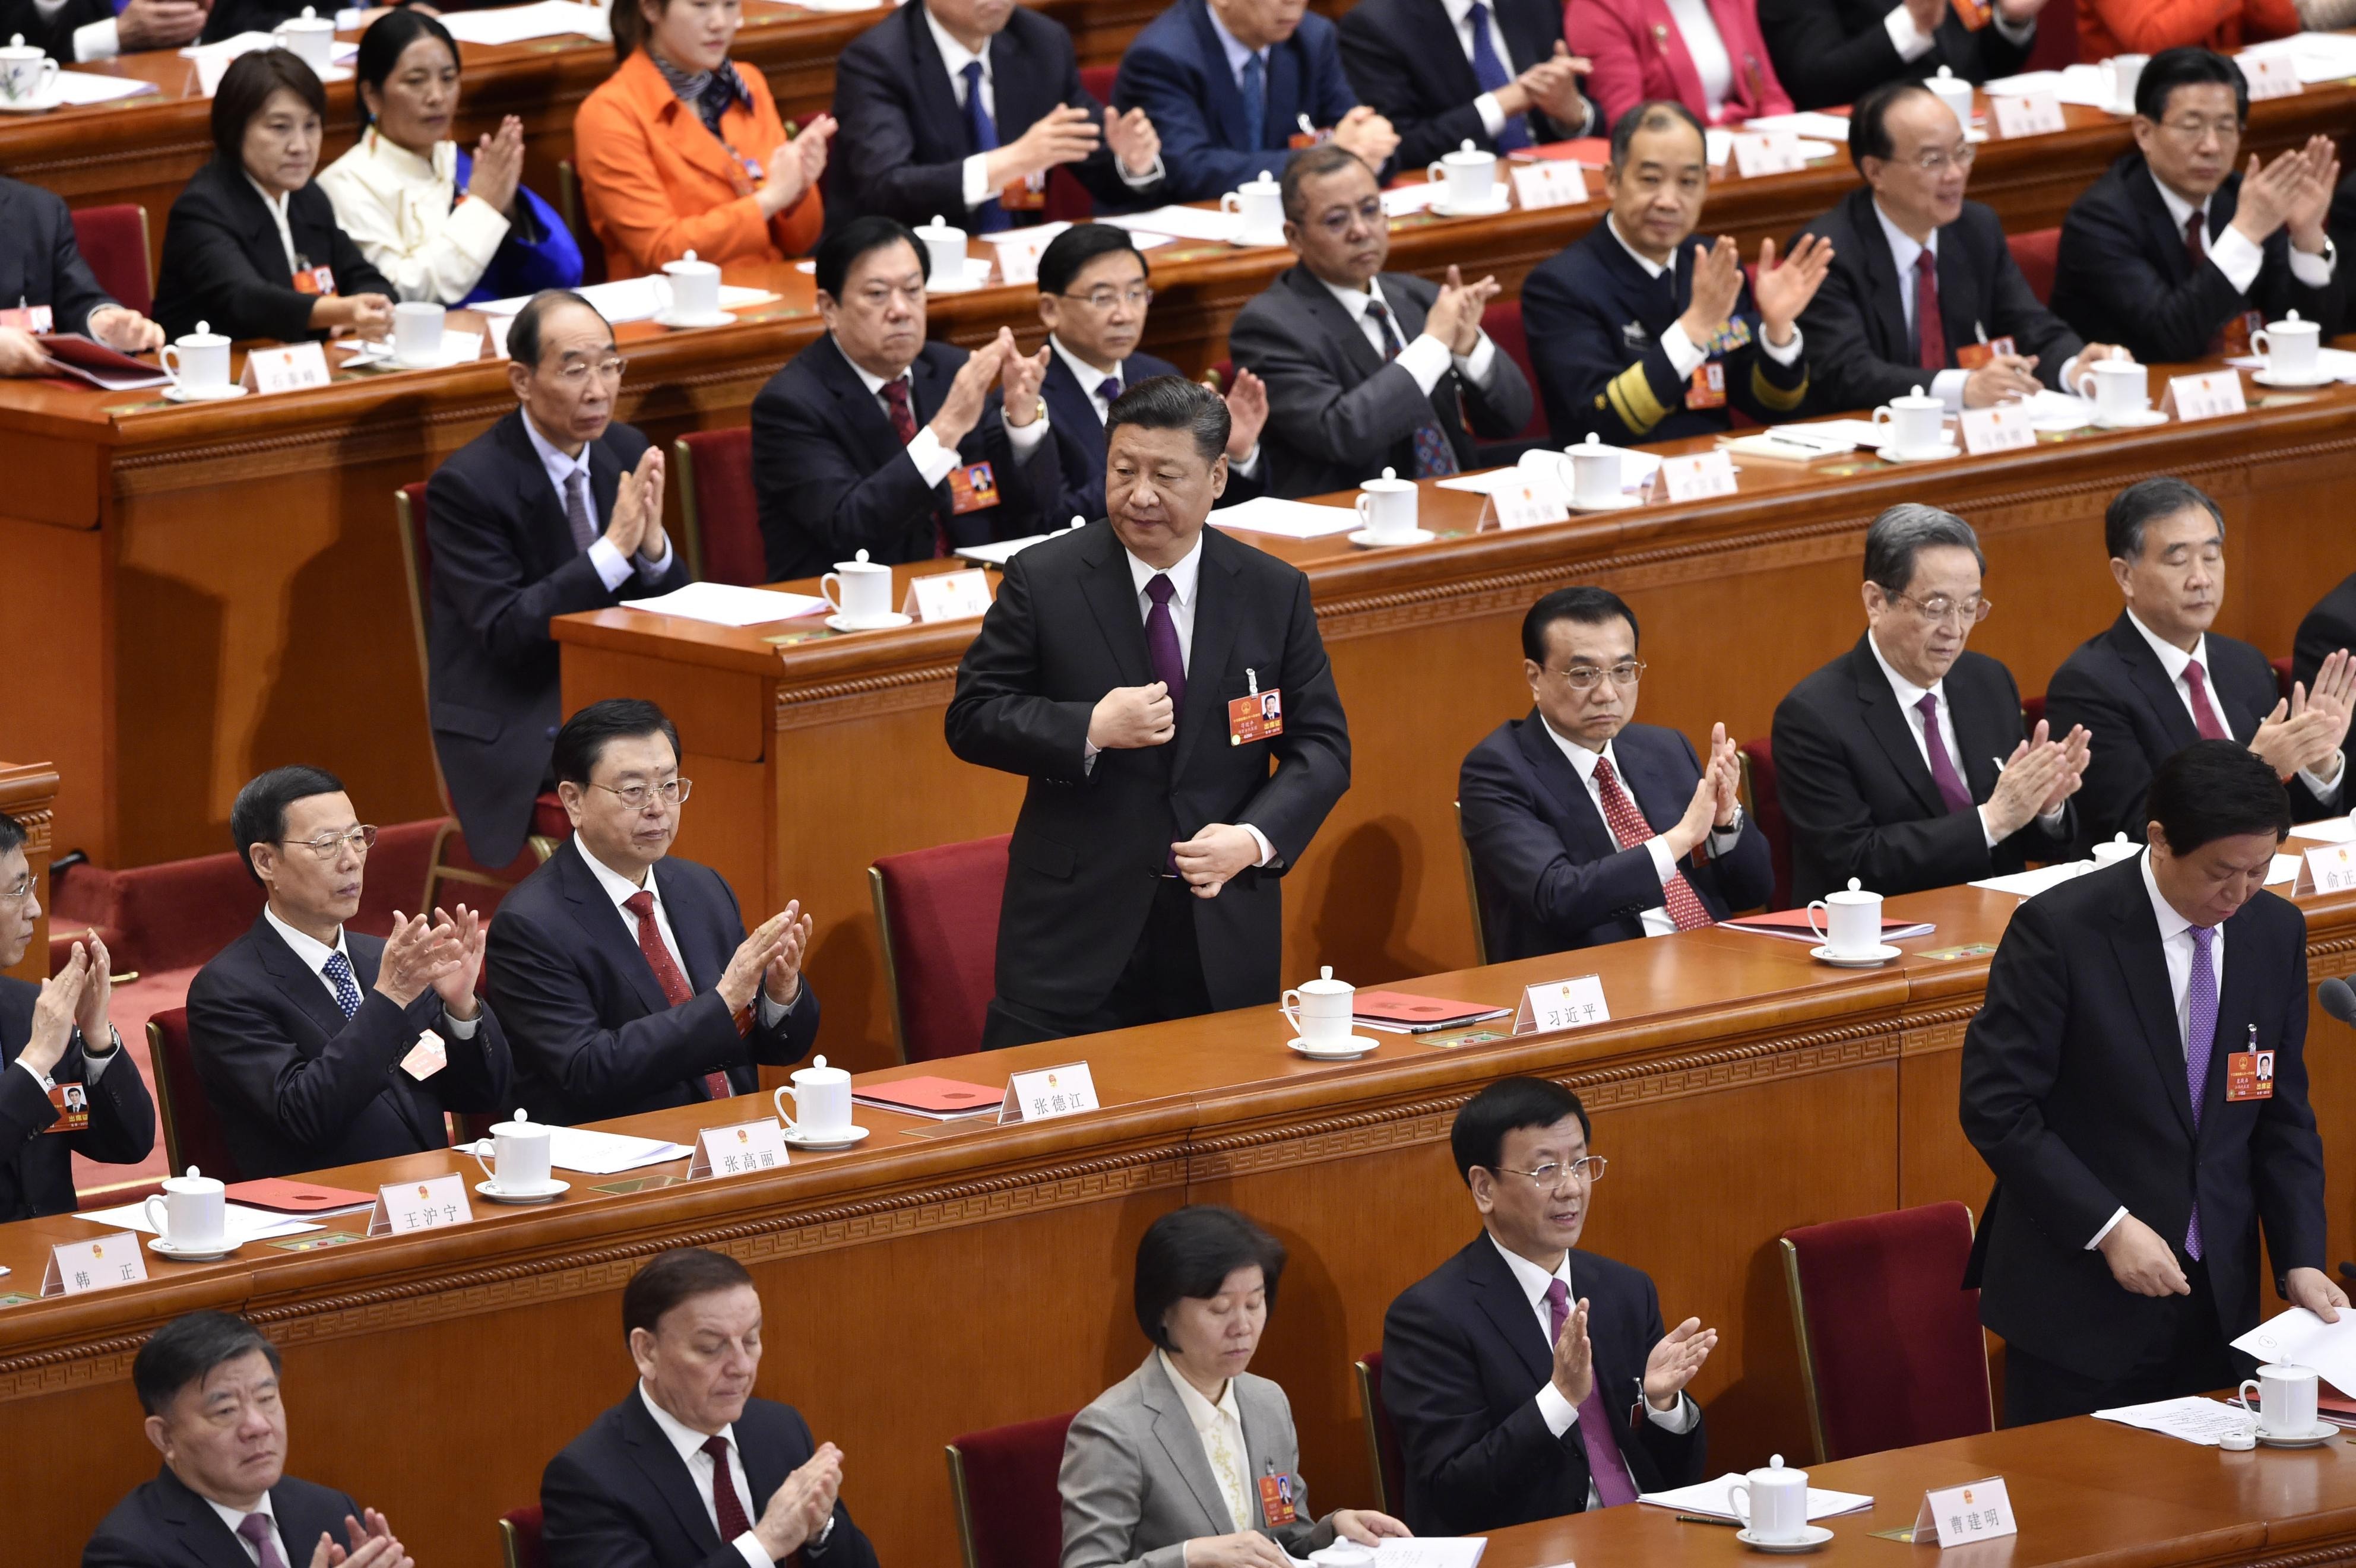 Xi Jinping (centre) sent a strong nationalist message in his closing speech to the National People’s Congress on Tuesday. Photo: Kyodo